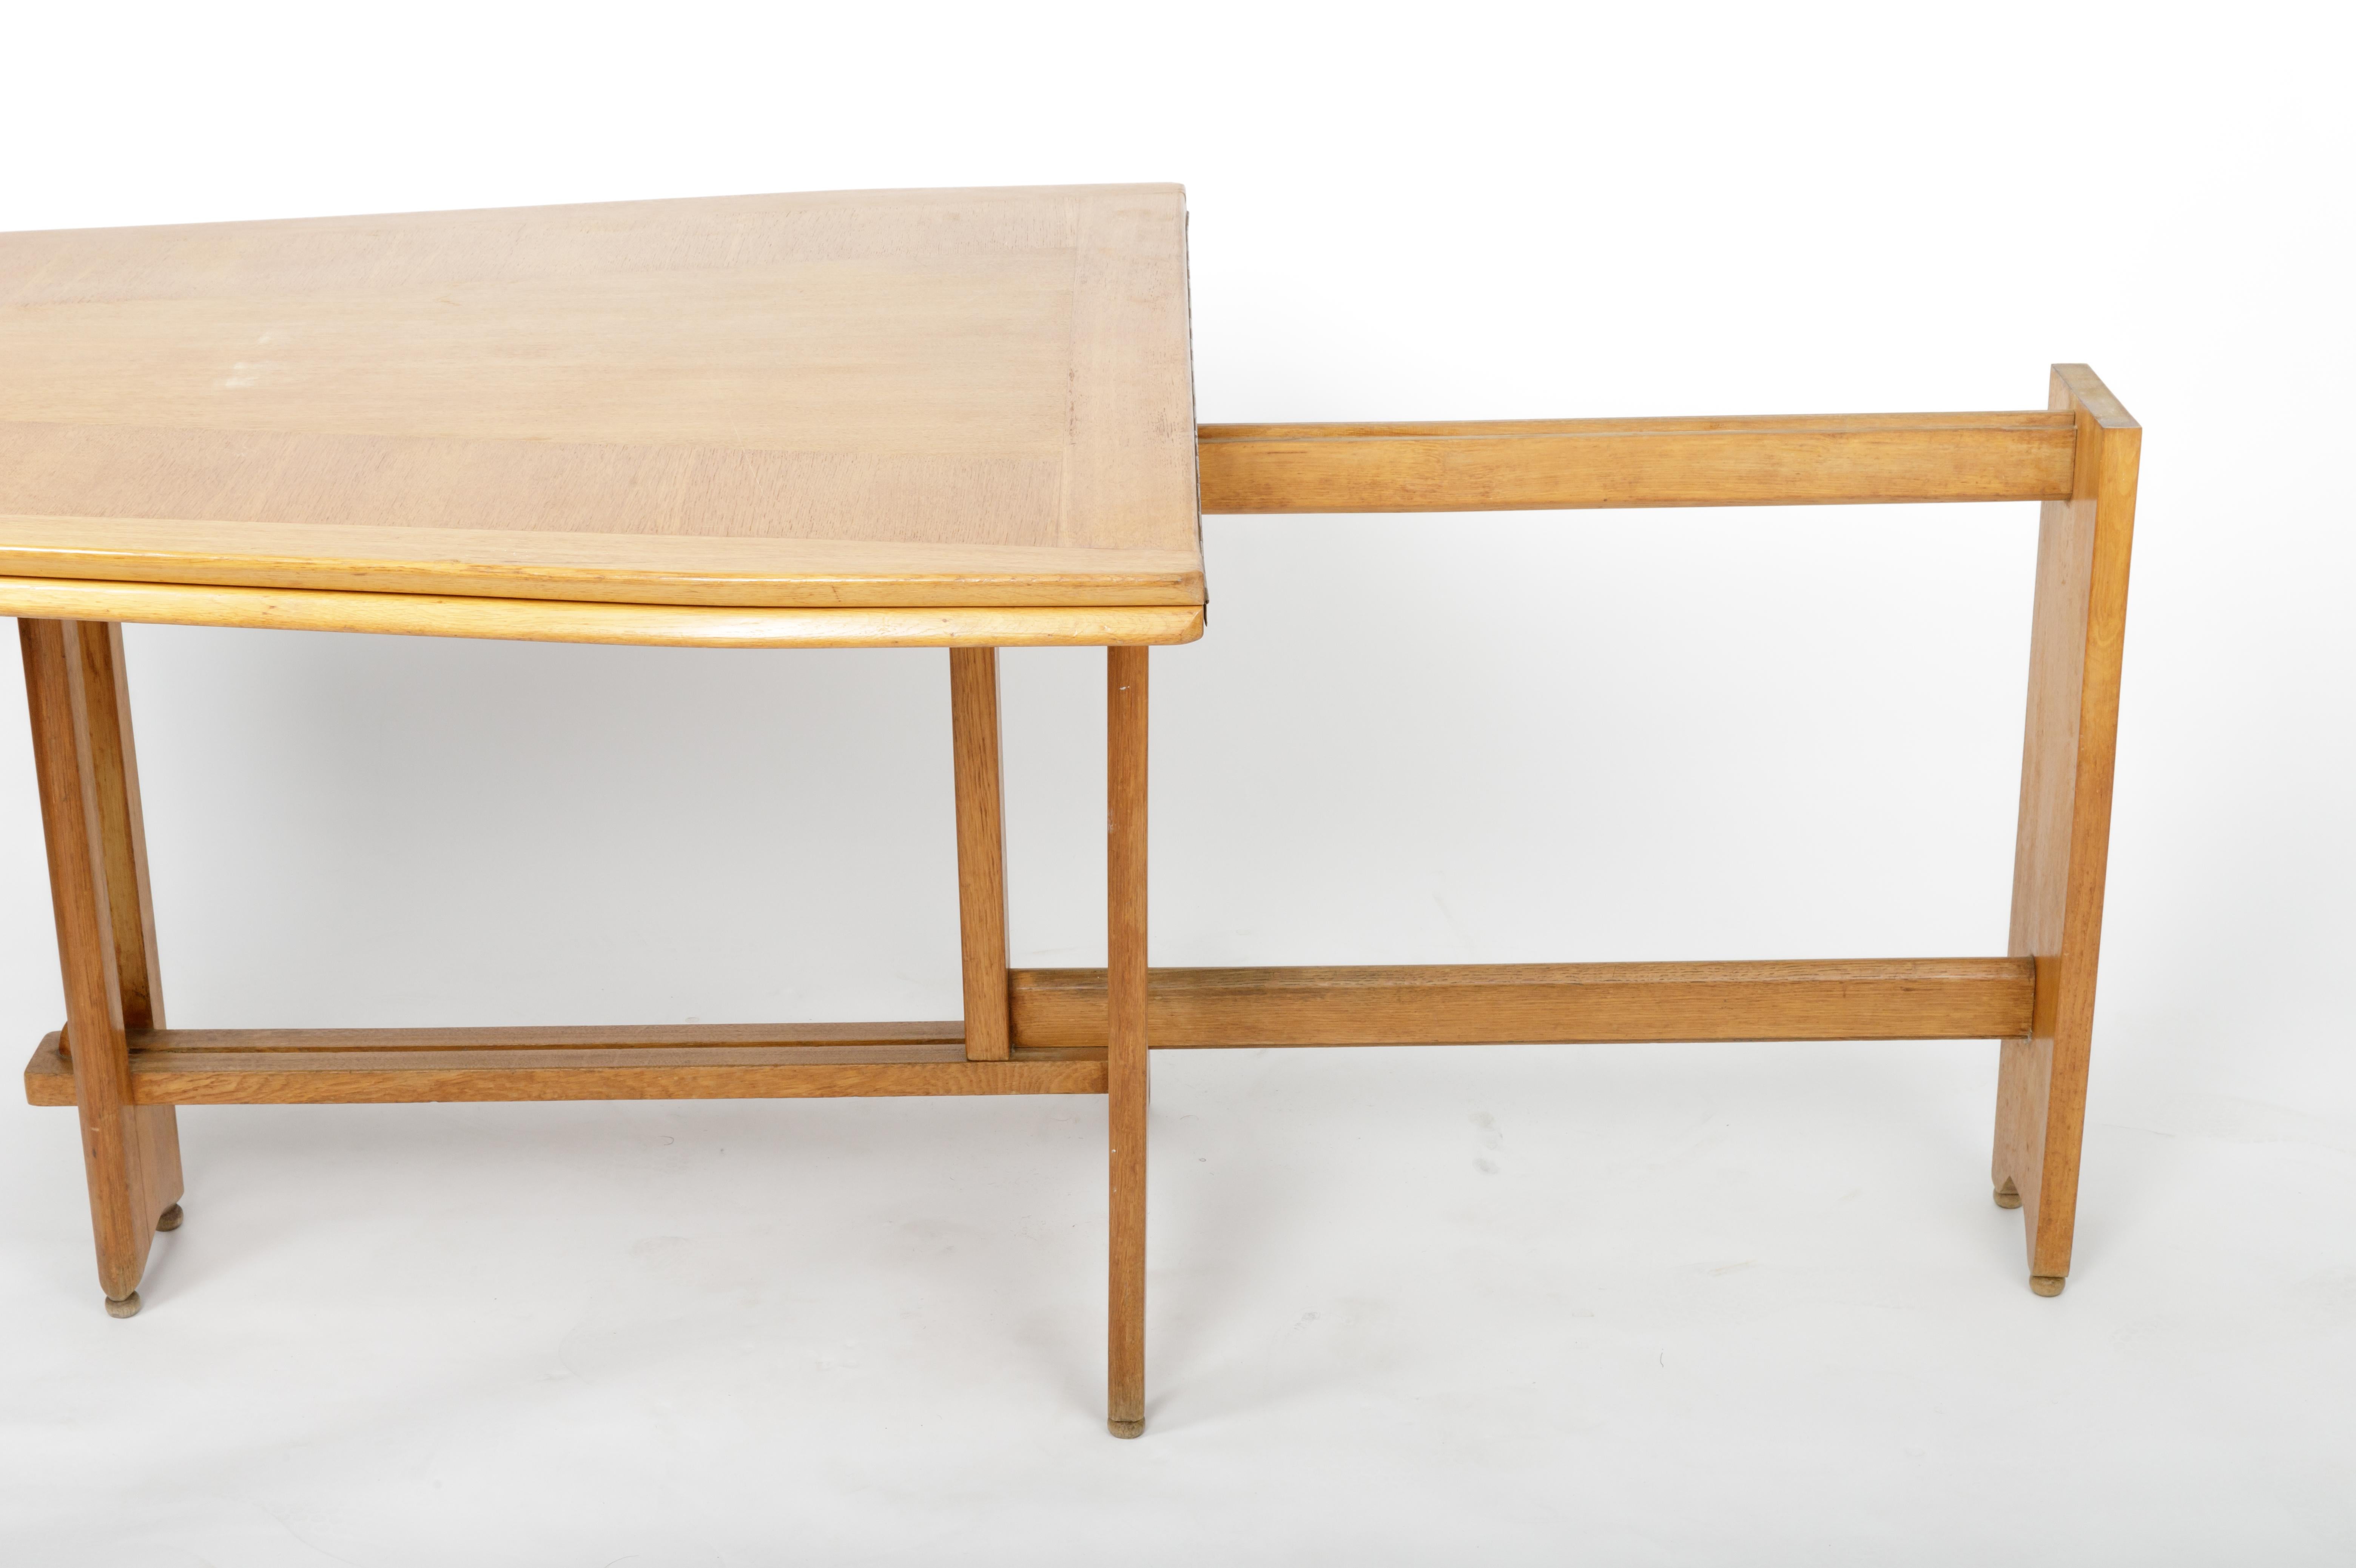 Wood Guillerme et Chambron Folding Dining Table, France, c. 1970s